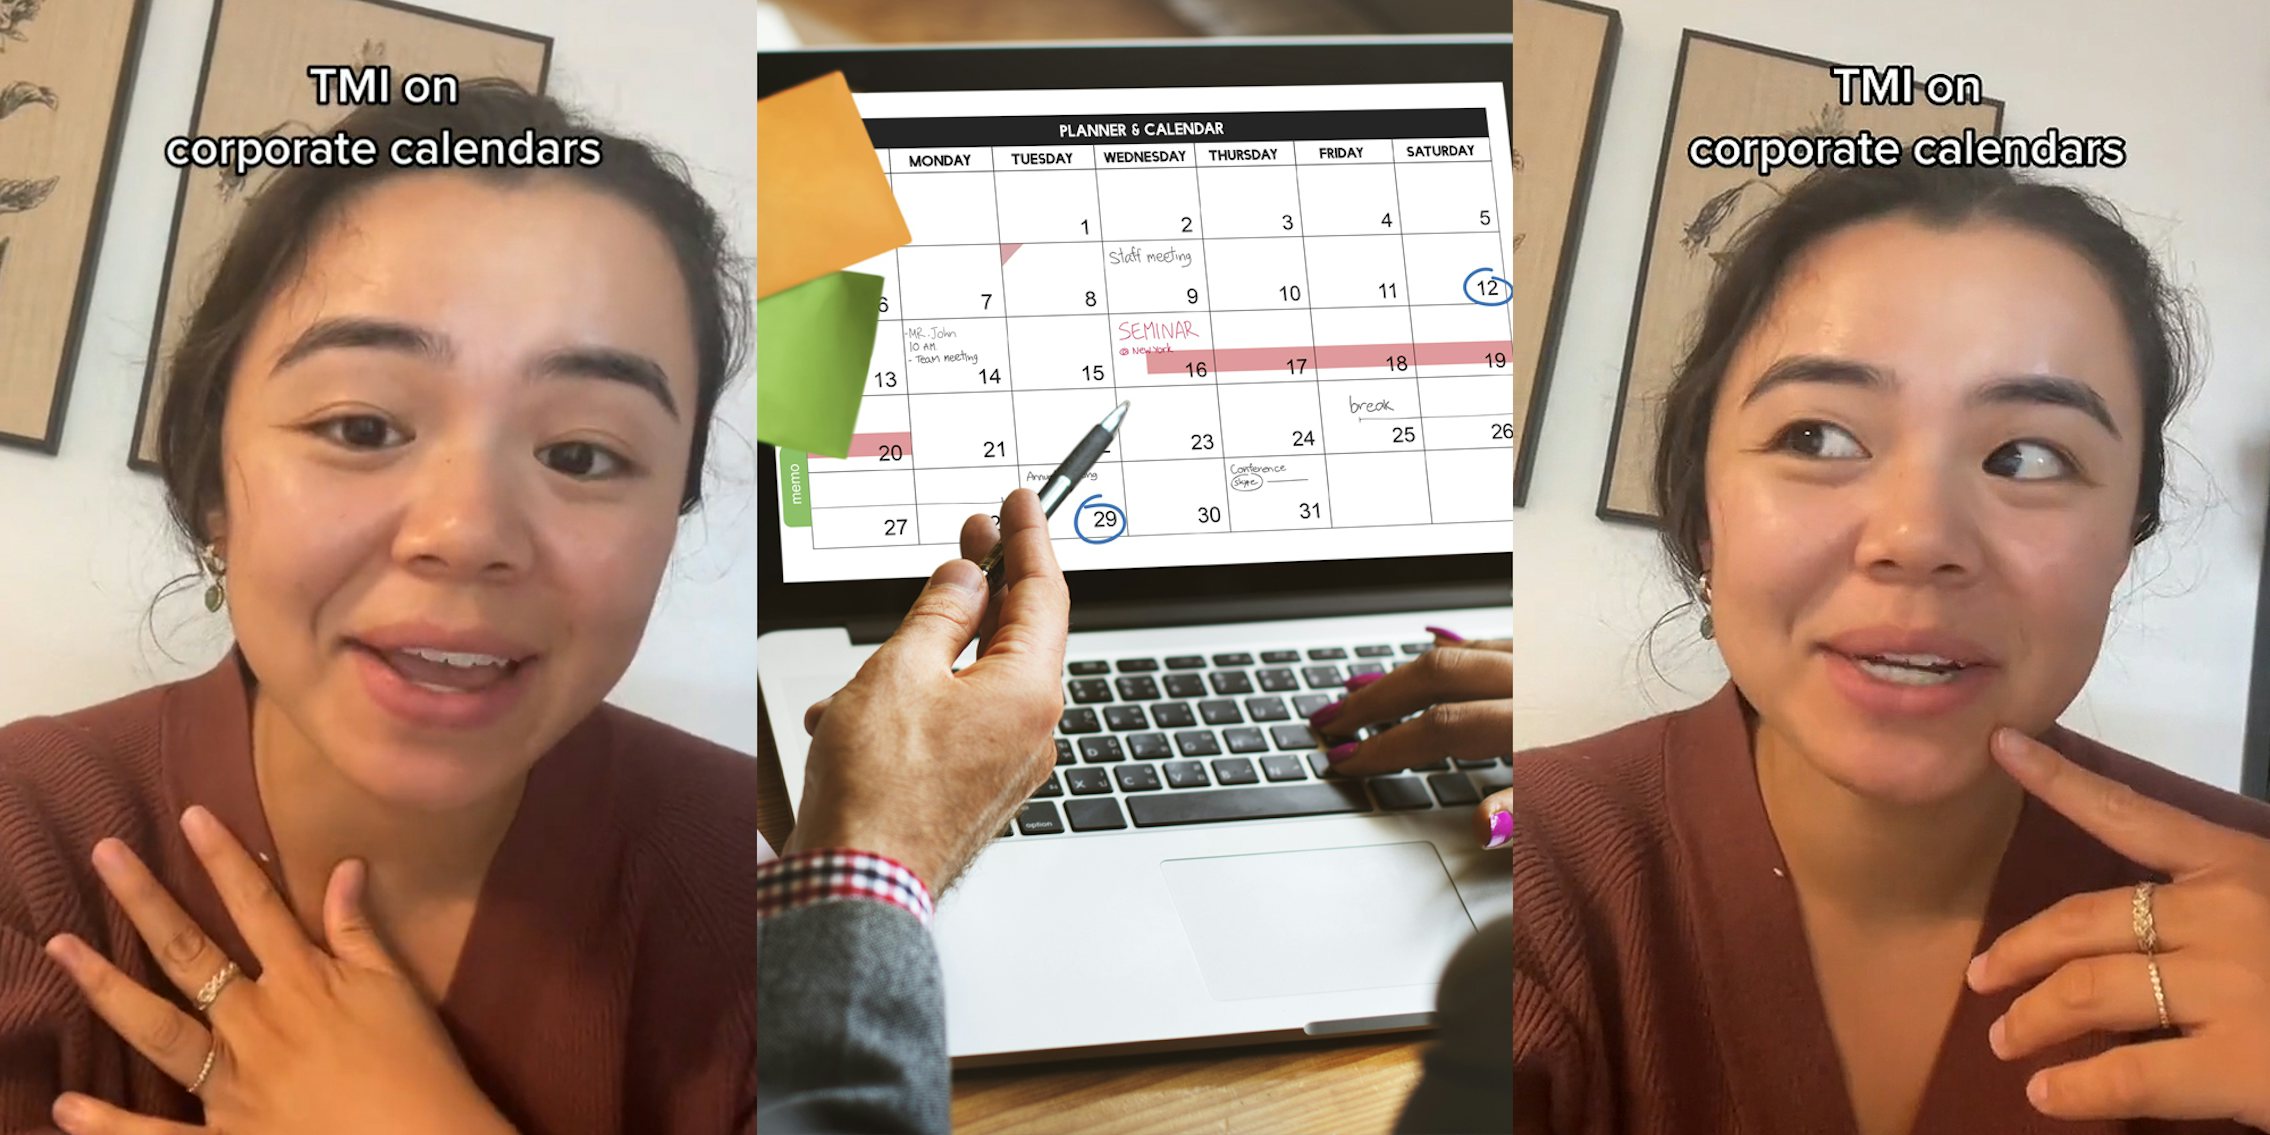 woman speaking with hand on chest caption 'TMI on corporate calendars' (l) office workers pointing to corporate calendar on laptop (c) woman speaking with hand on cheek caption 'TMI on corporate calendars' (r)